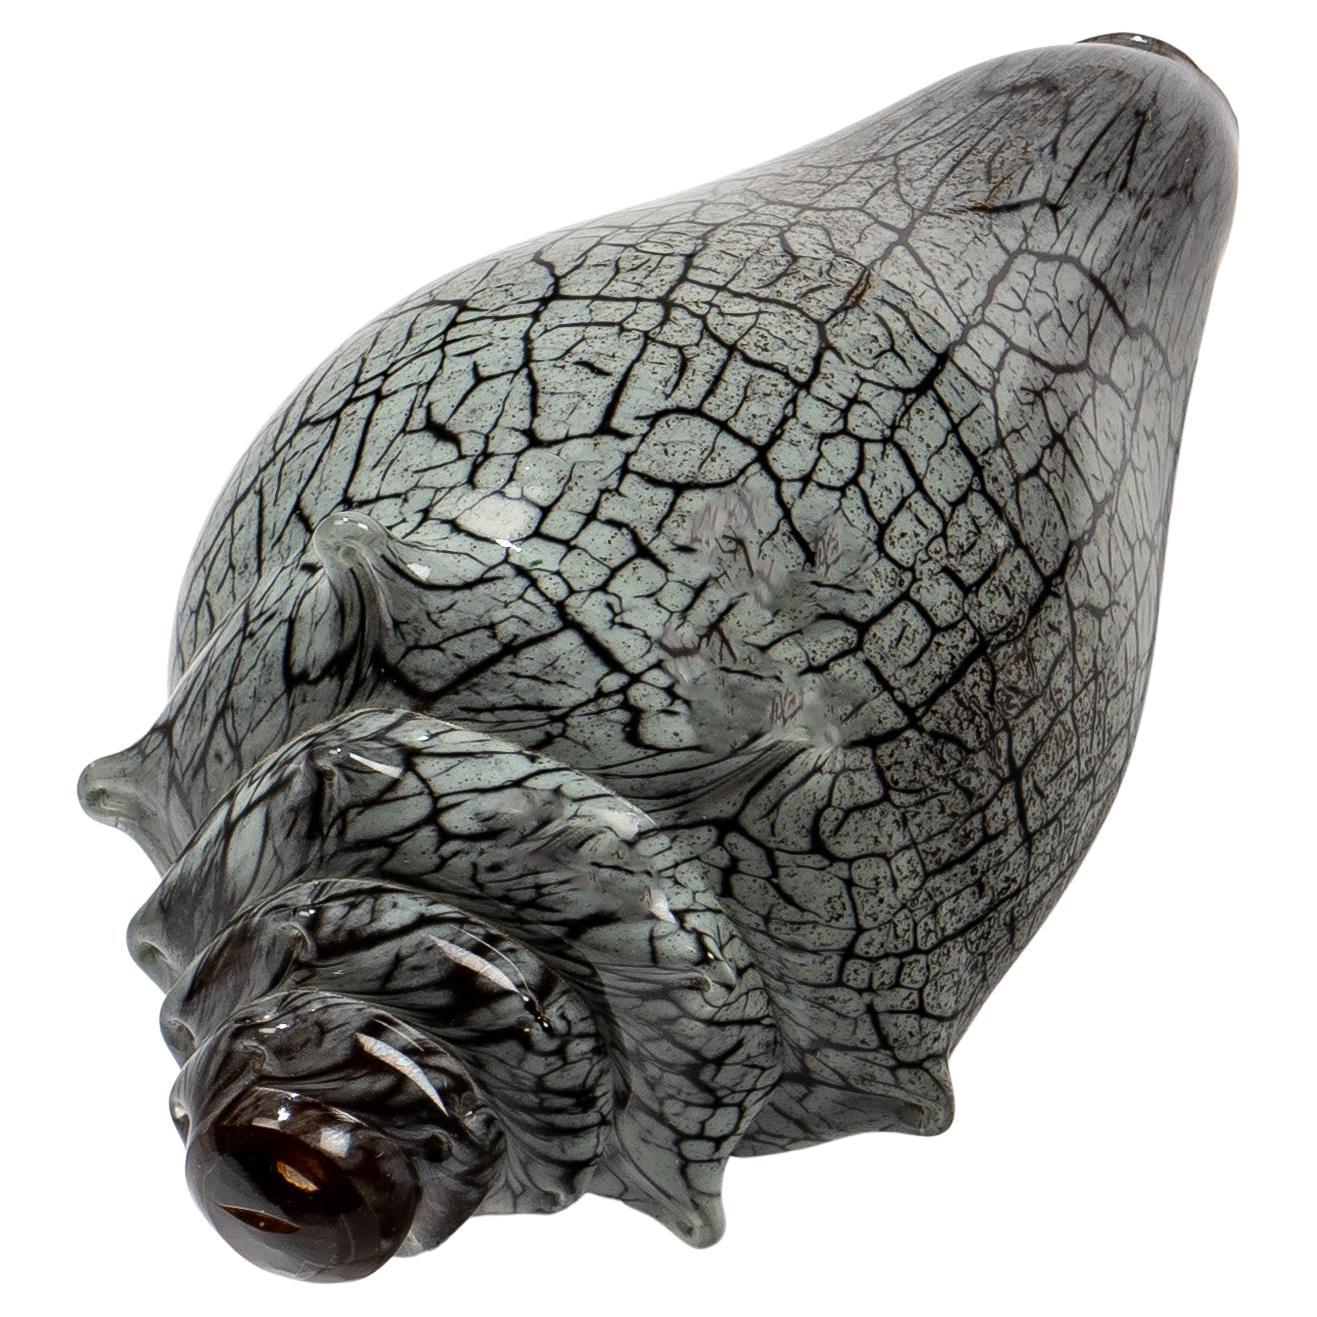 Crackled Conch Shell: a Stunning Glass Art Piece with a Coastal Twist